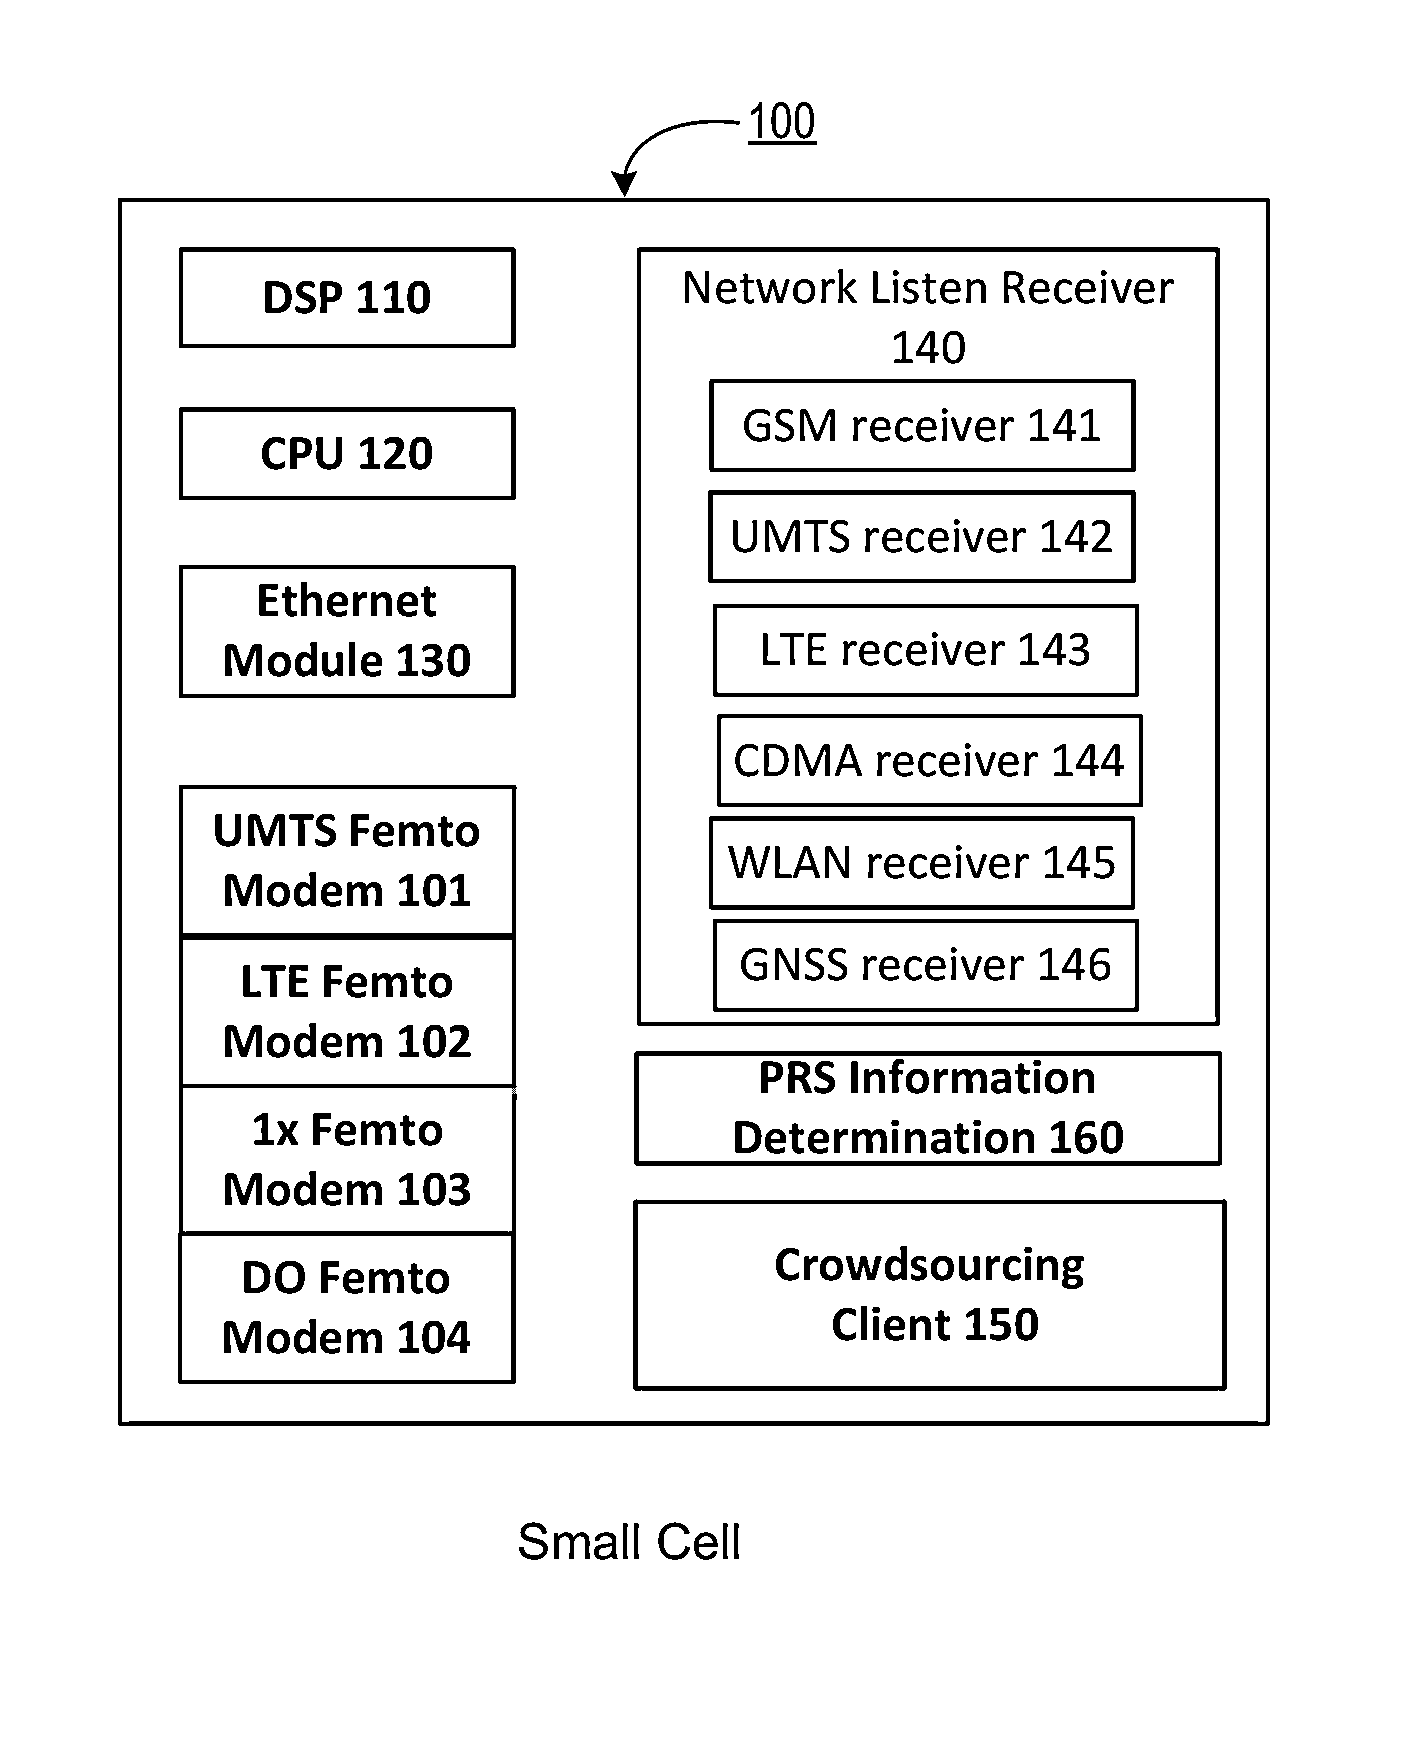 Crowdsourcing information in a communication network using small cells